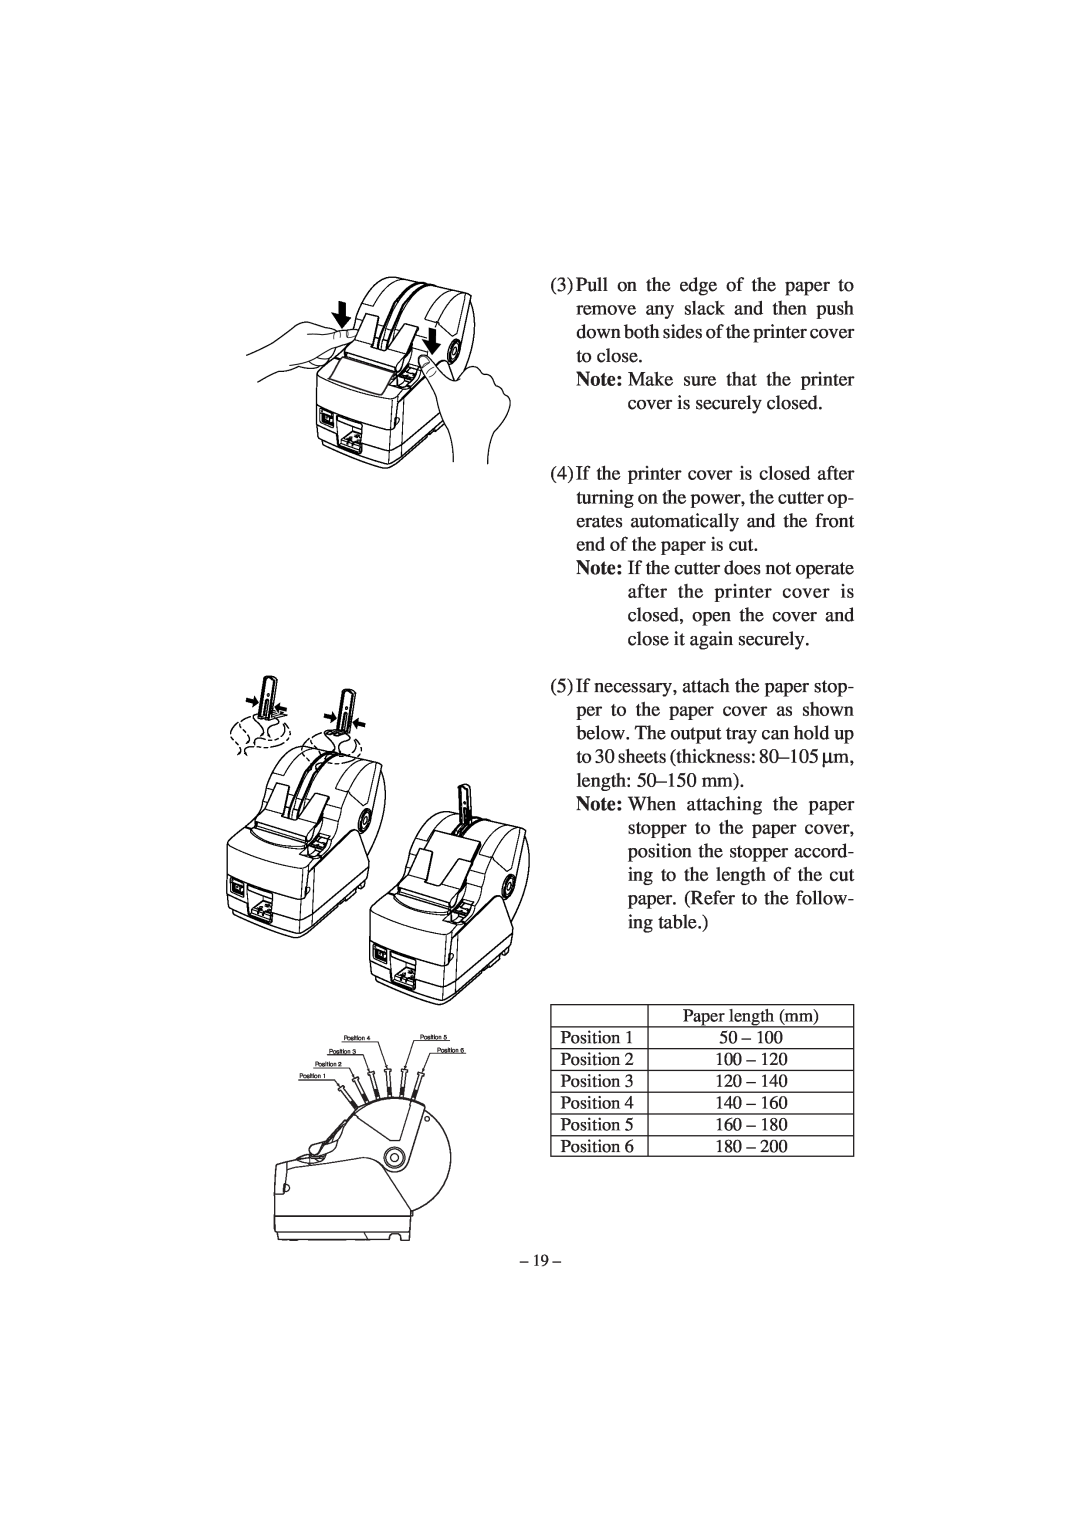 Star Micronics TSP1000 user manual Note Make sure that the printer cover is securely closed 